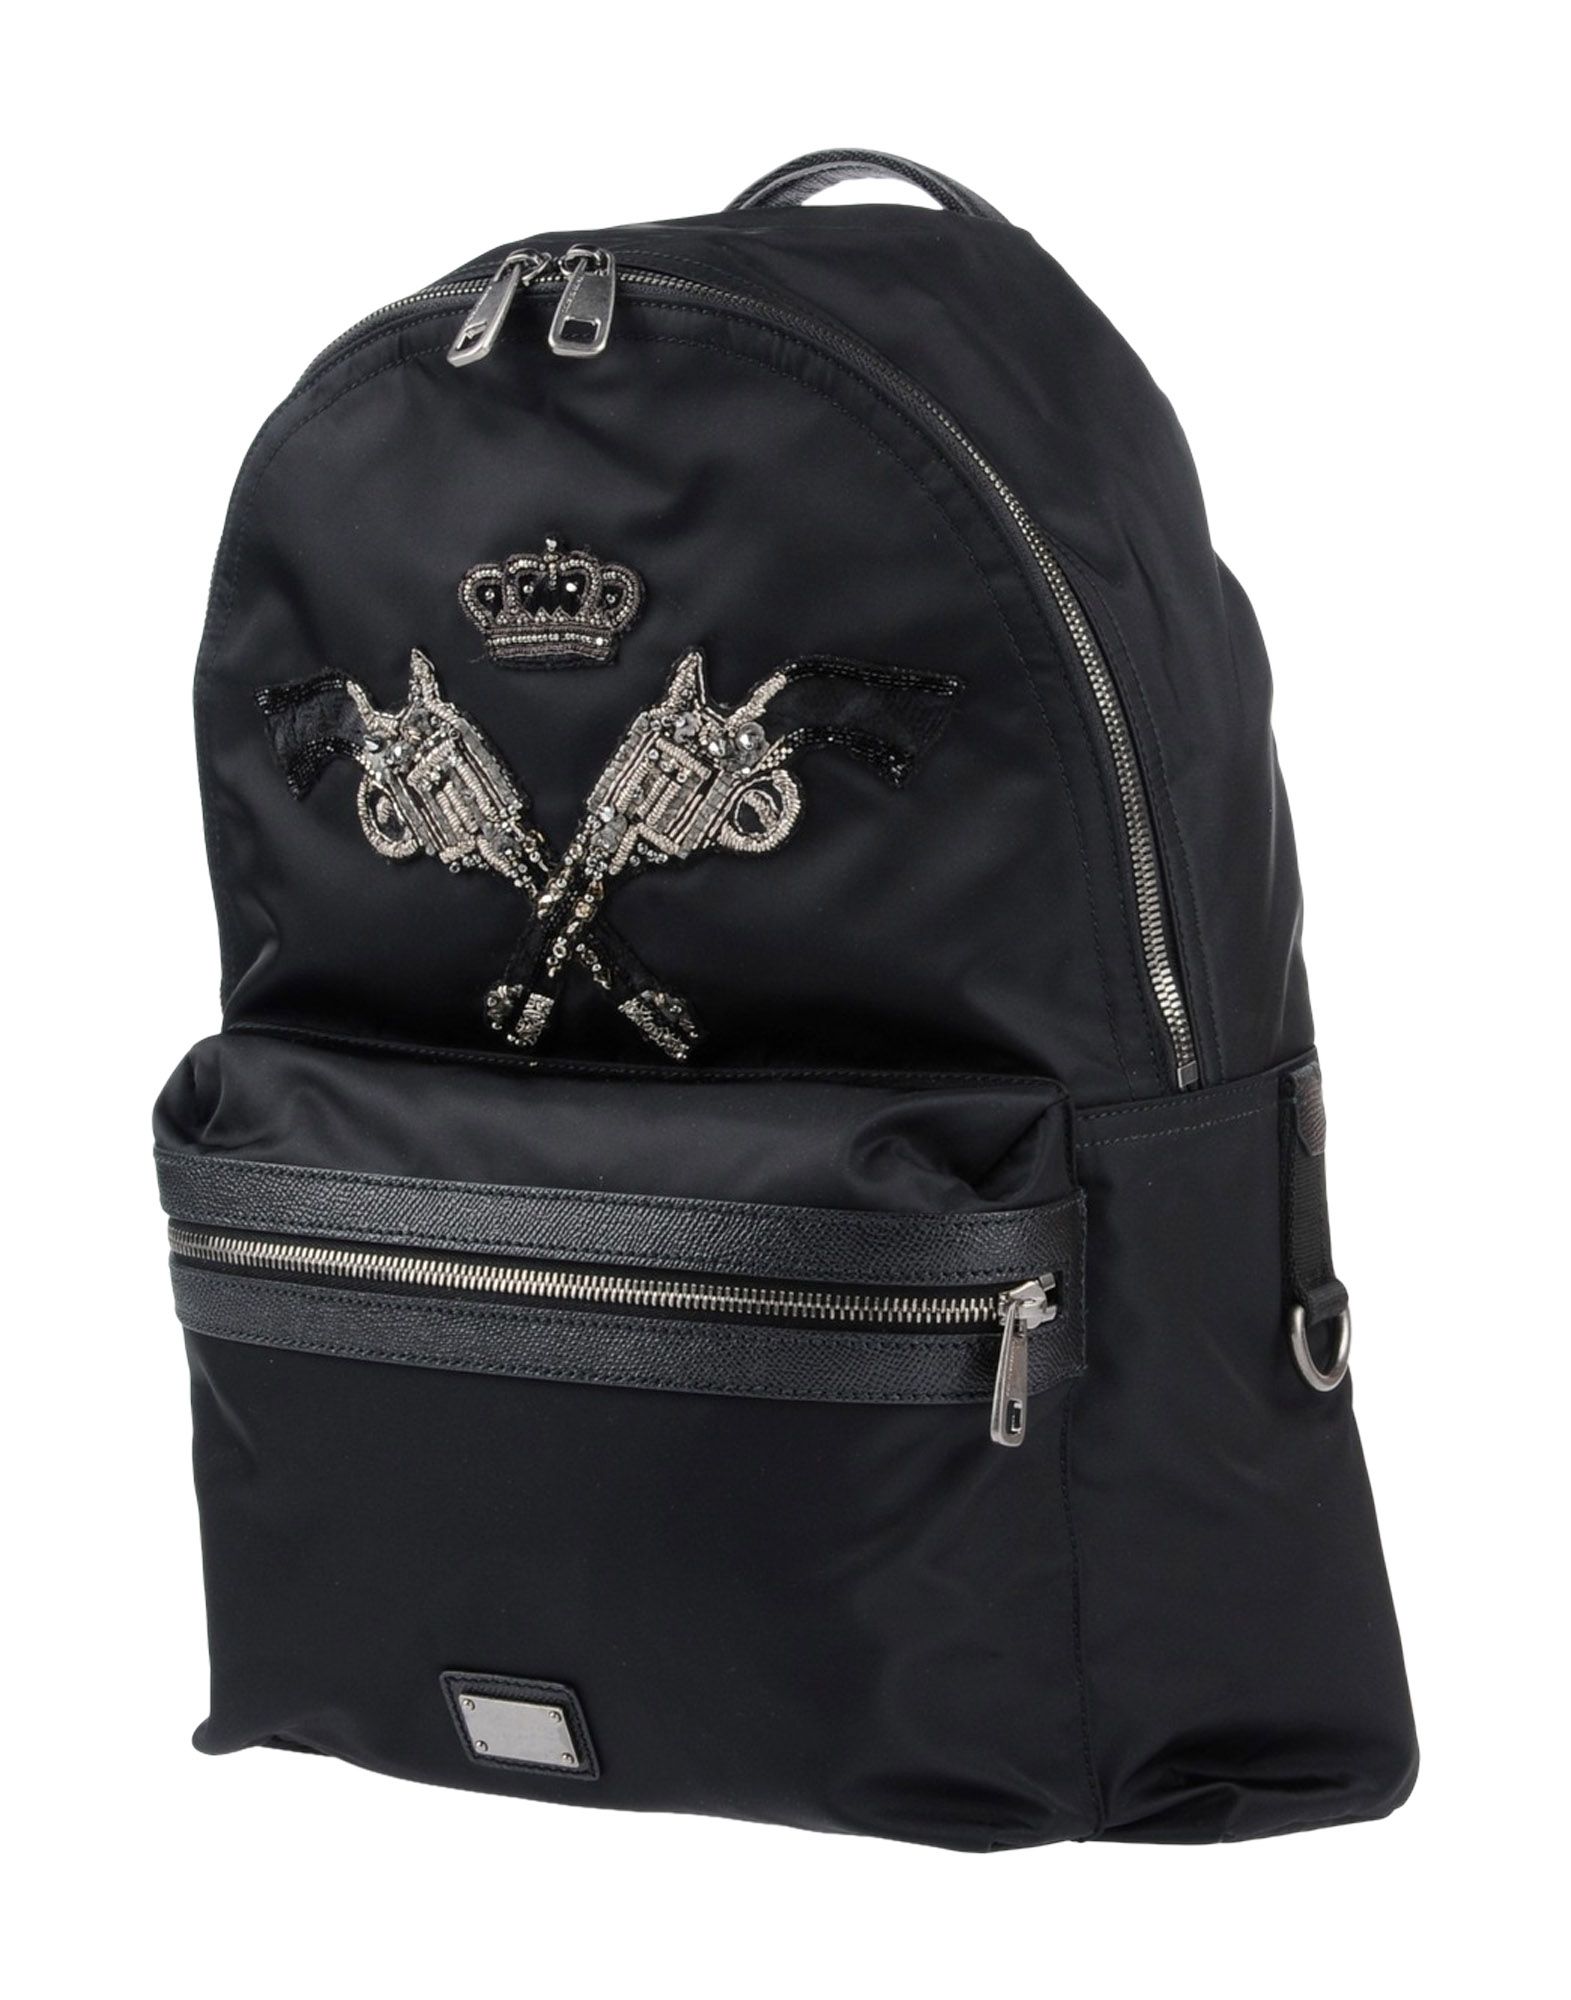 DOLCE & GABBANA Backpack & fanny pack,45344612WD 1